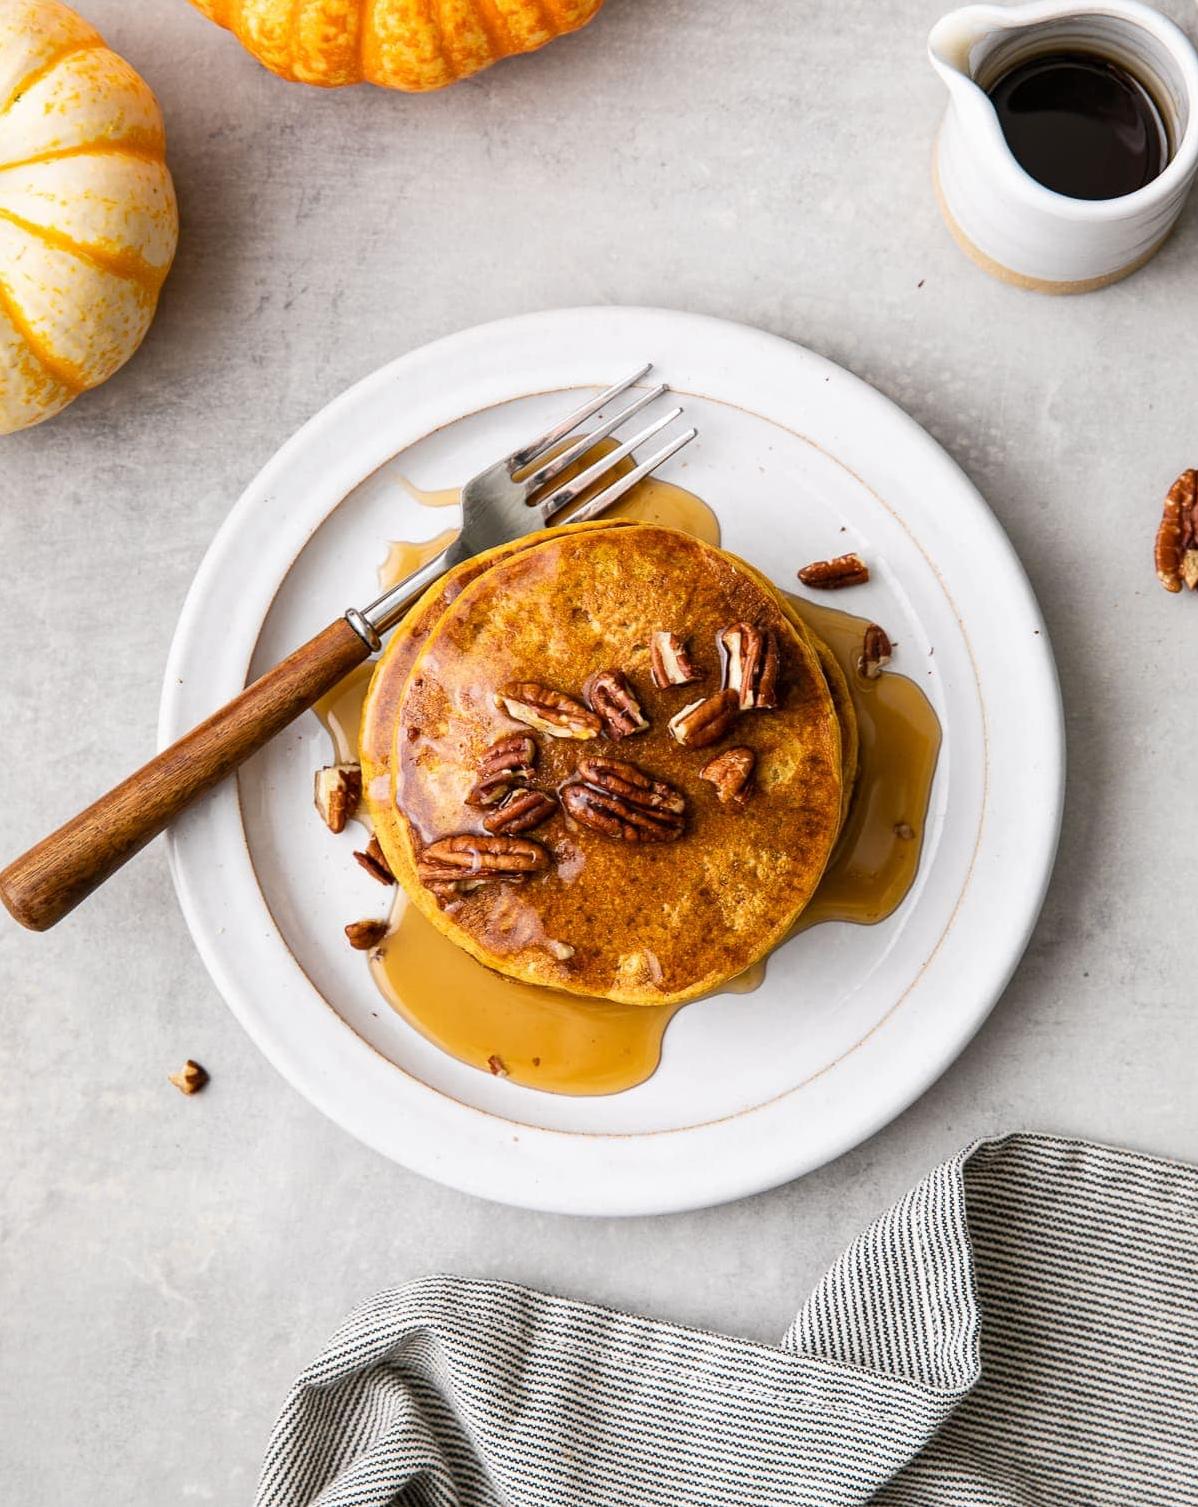  Start your day off on a delicious note with these pumpkin pancakes